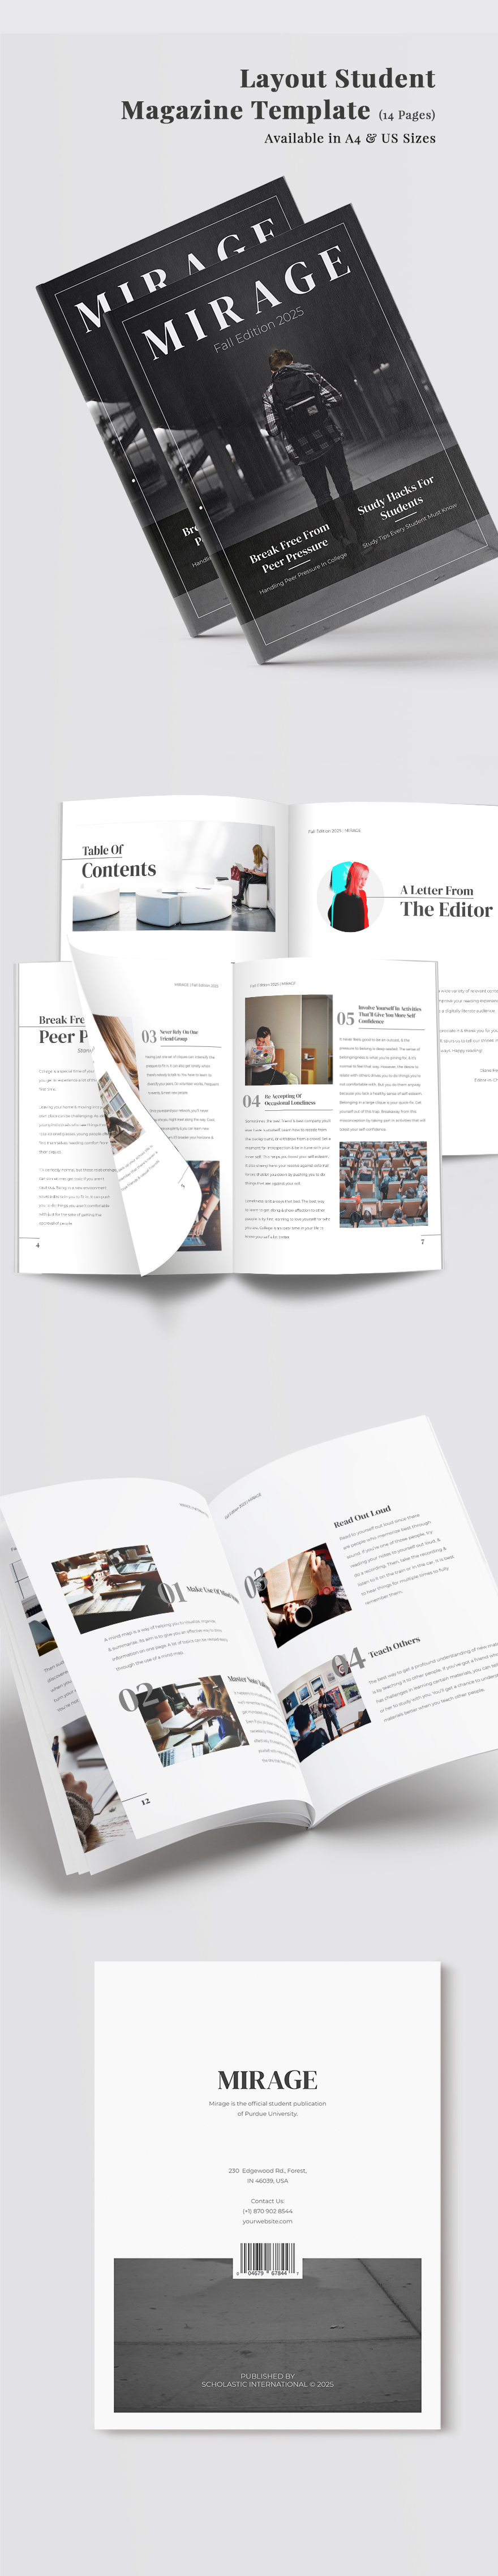 lifestyle-magazine-layout-template-indesign-word-apple-pages